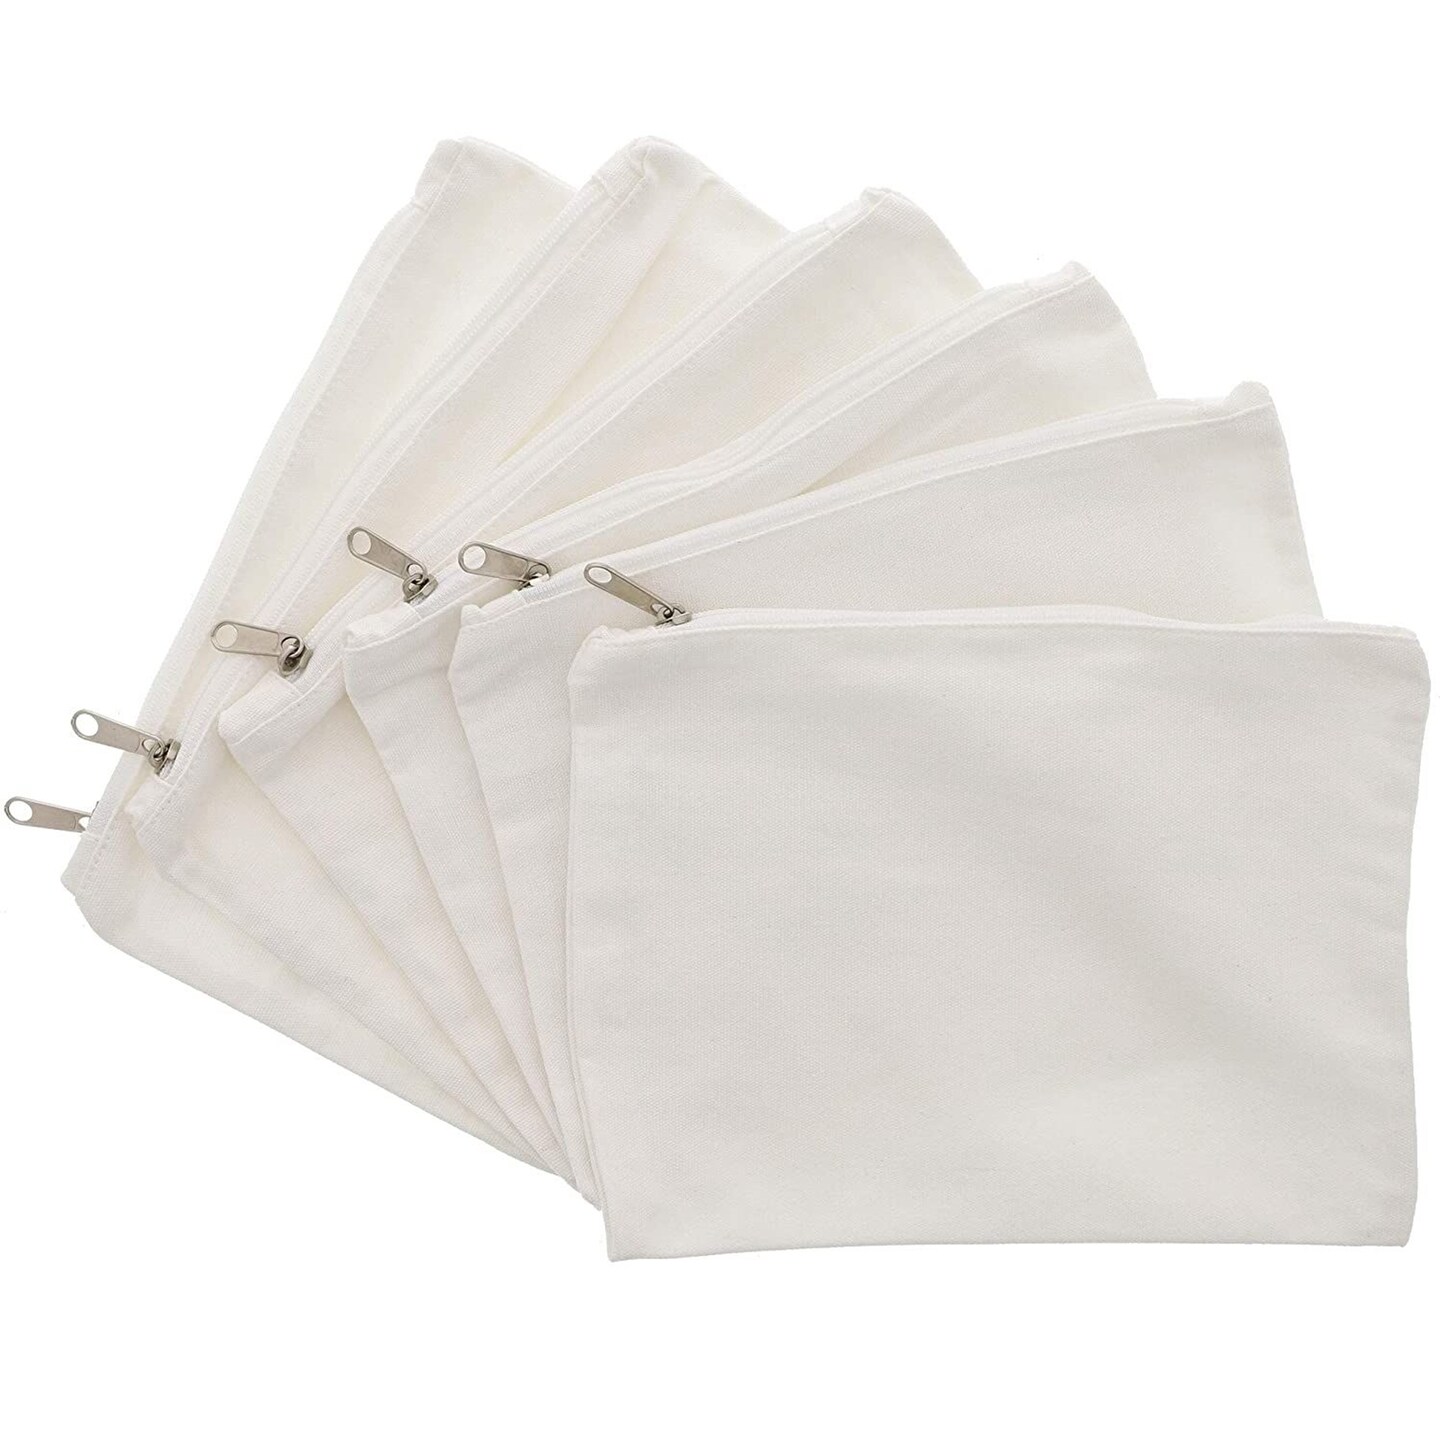 6-Pack White Makeup Bag Set with Zipper, Customizable Canvas